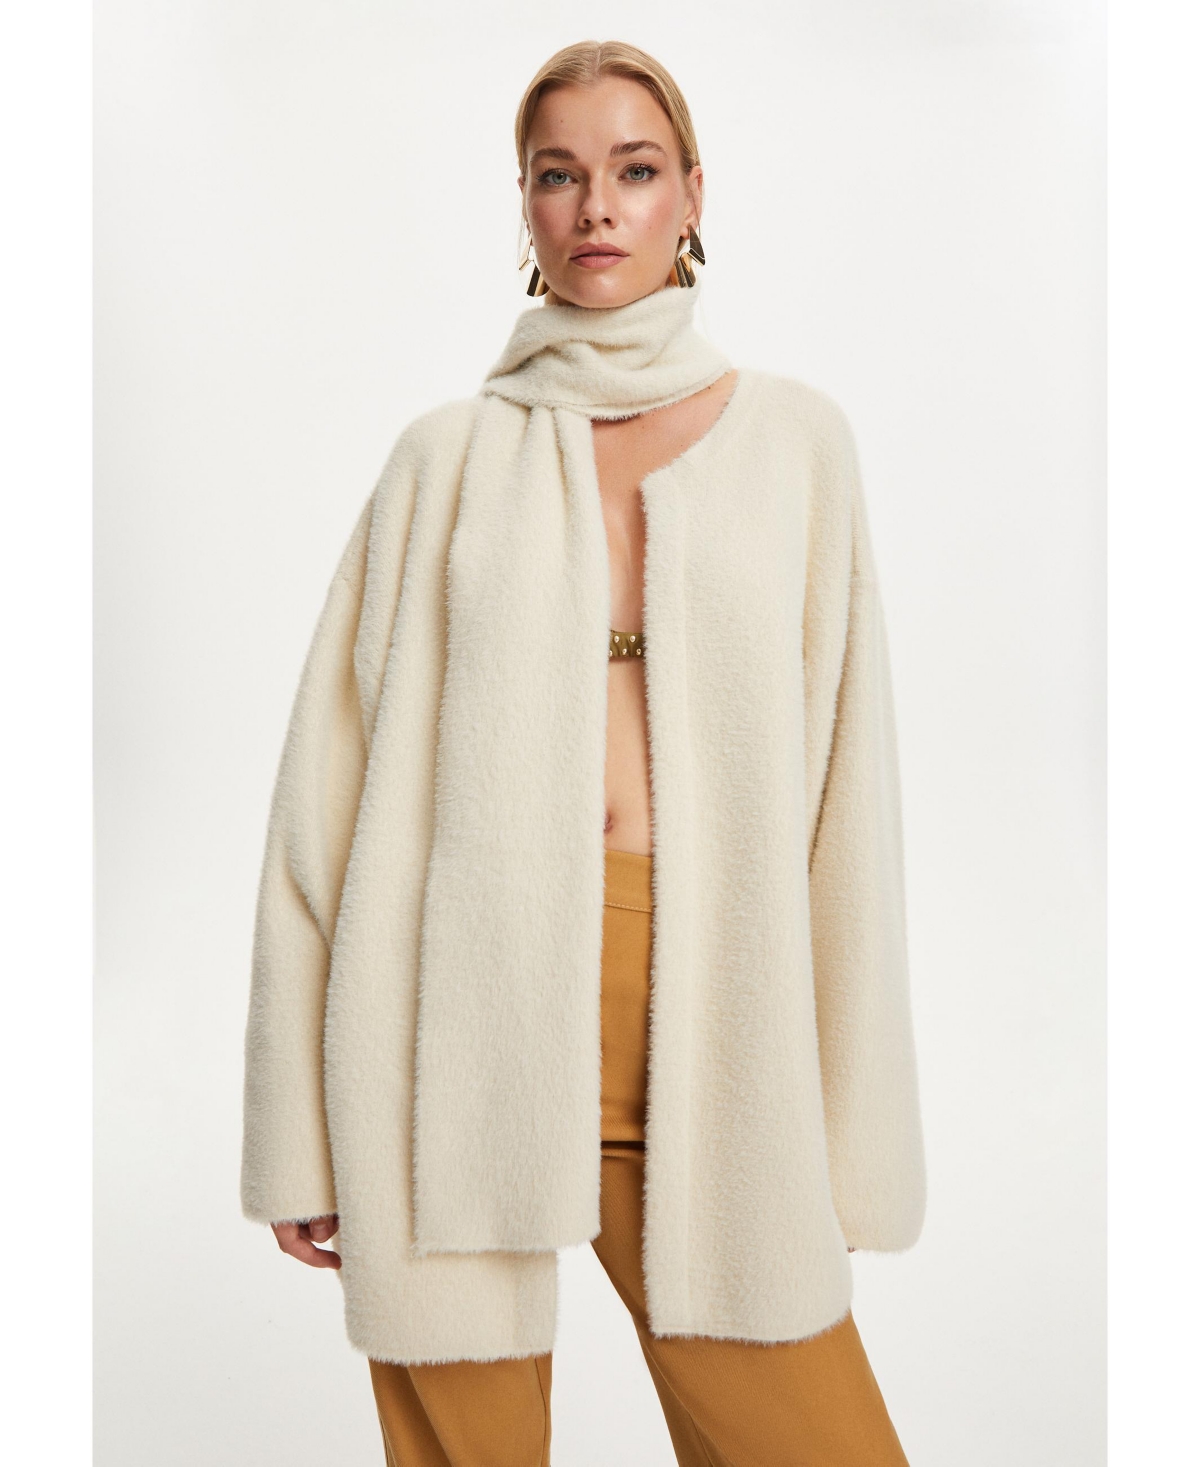 Women's Knit Cardigan with Removable Scarf - Light beige